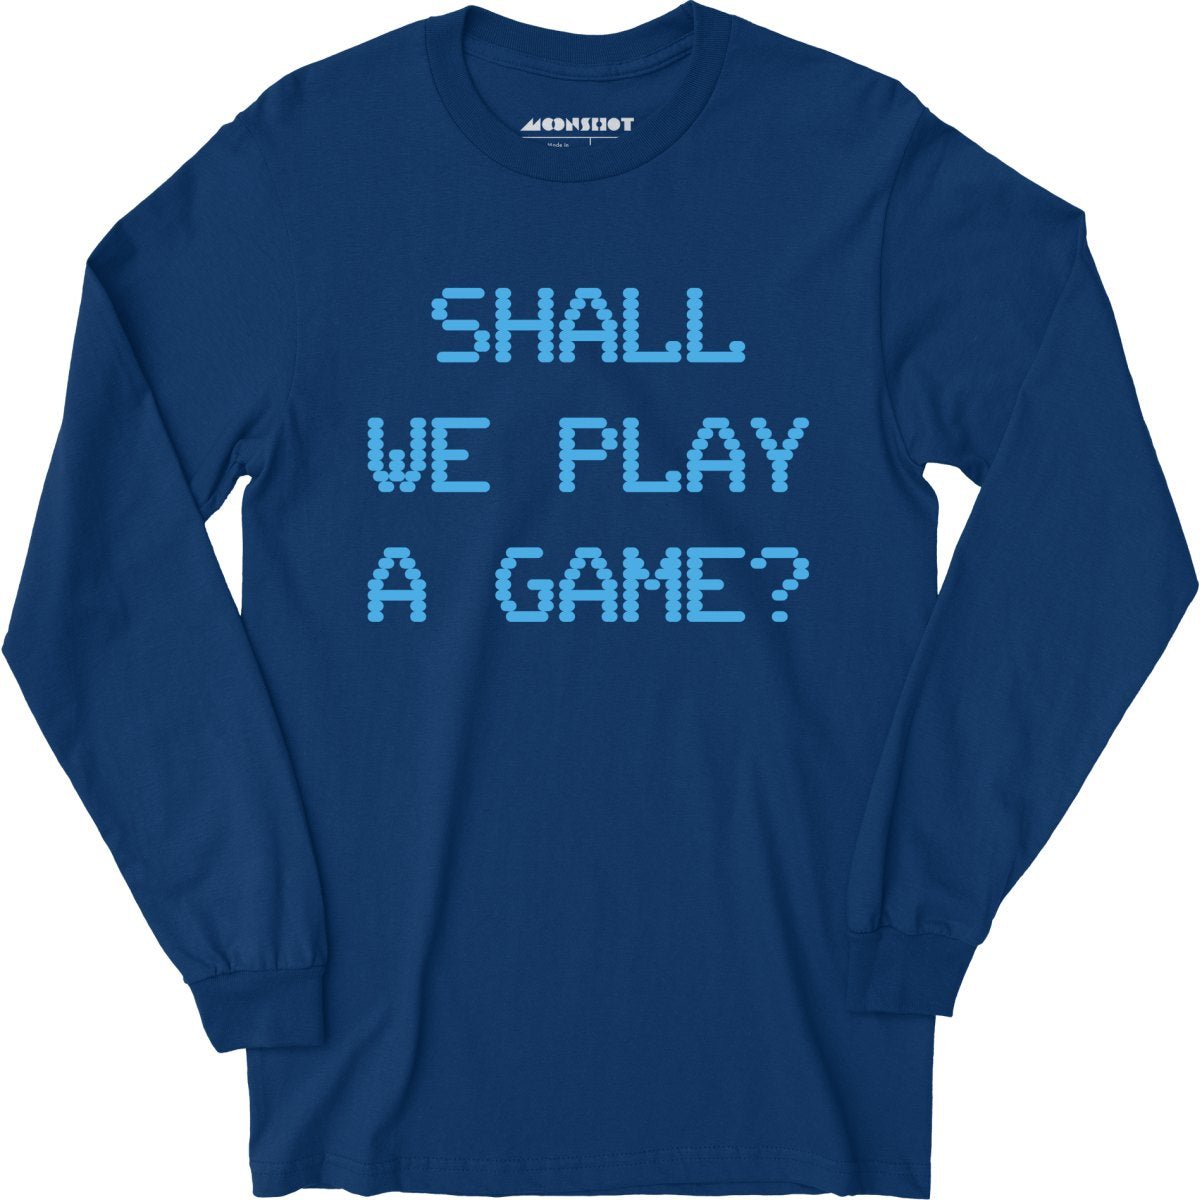 Shall We Play a Game? - Long Sleeve T-Shirt